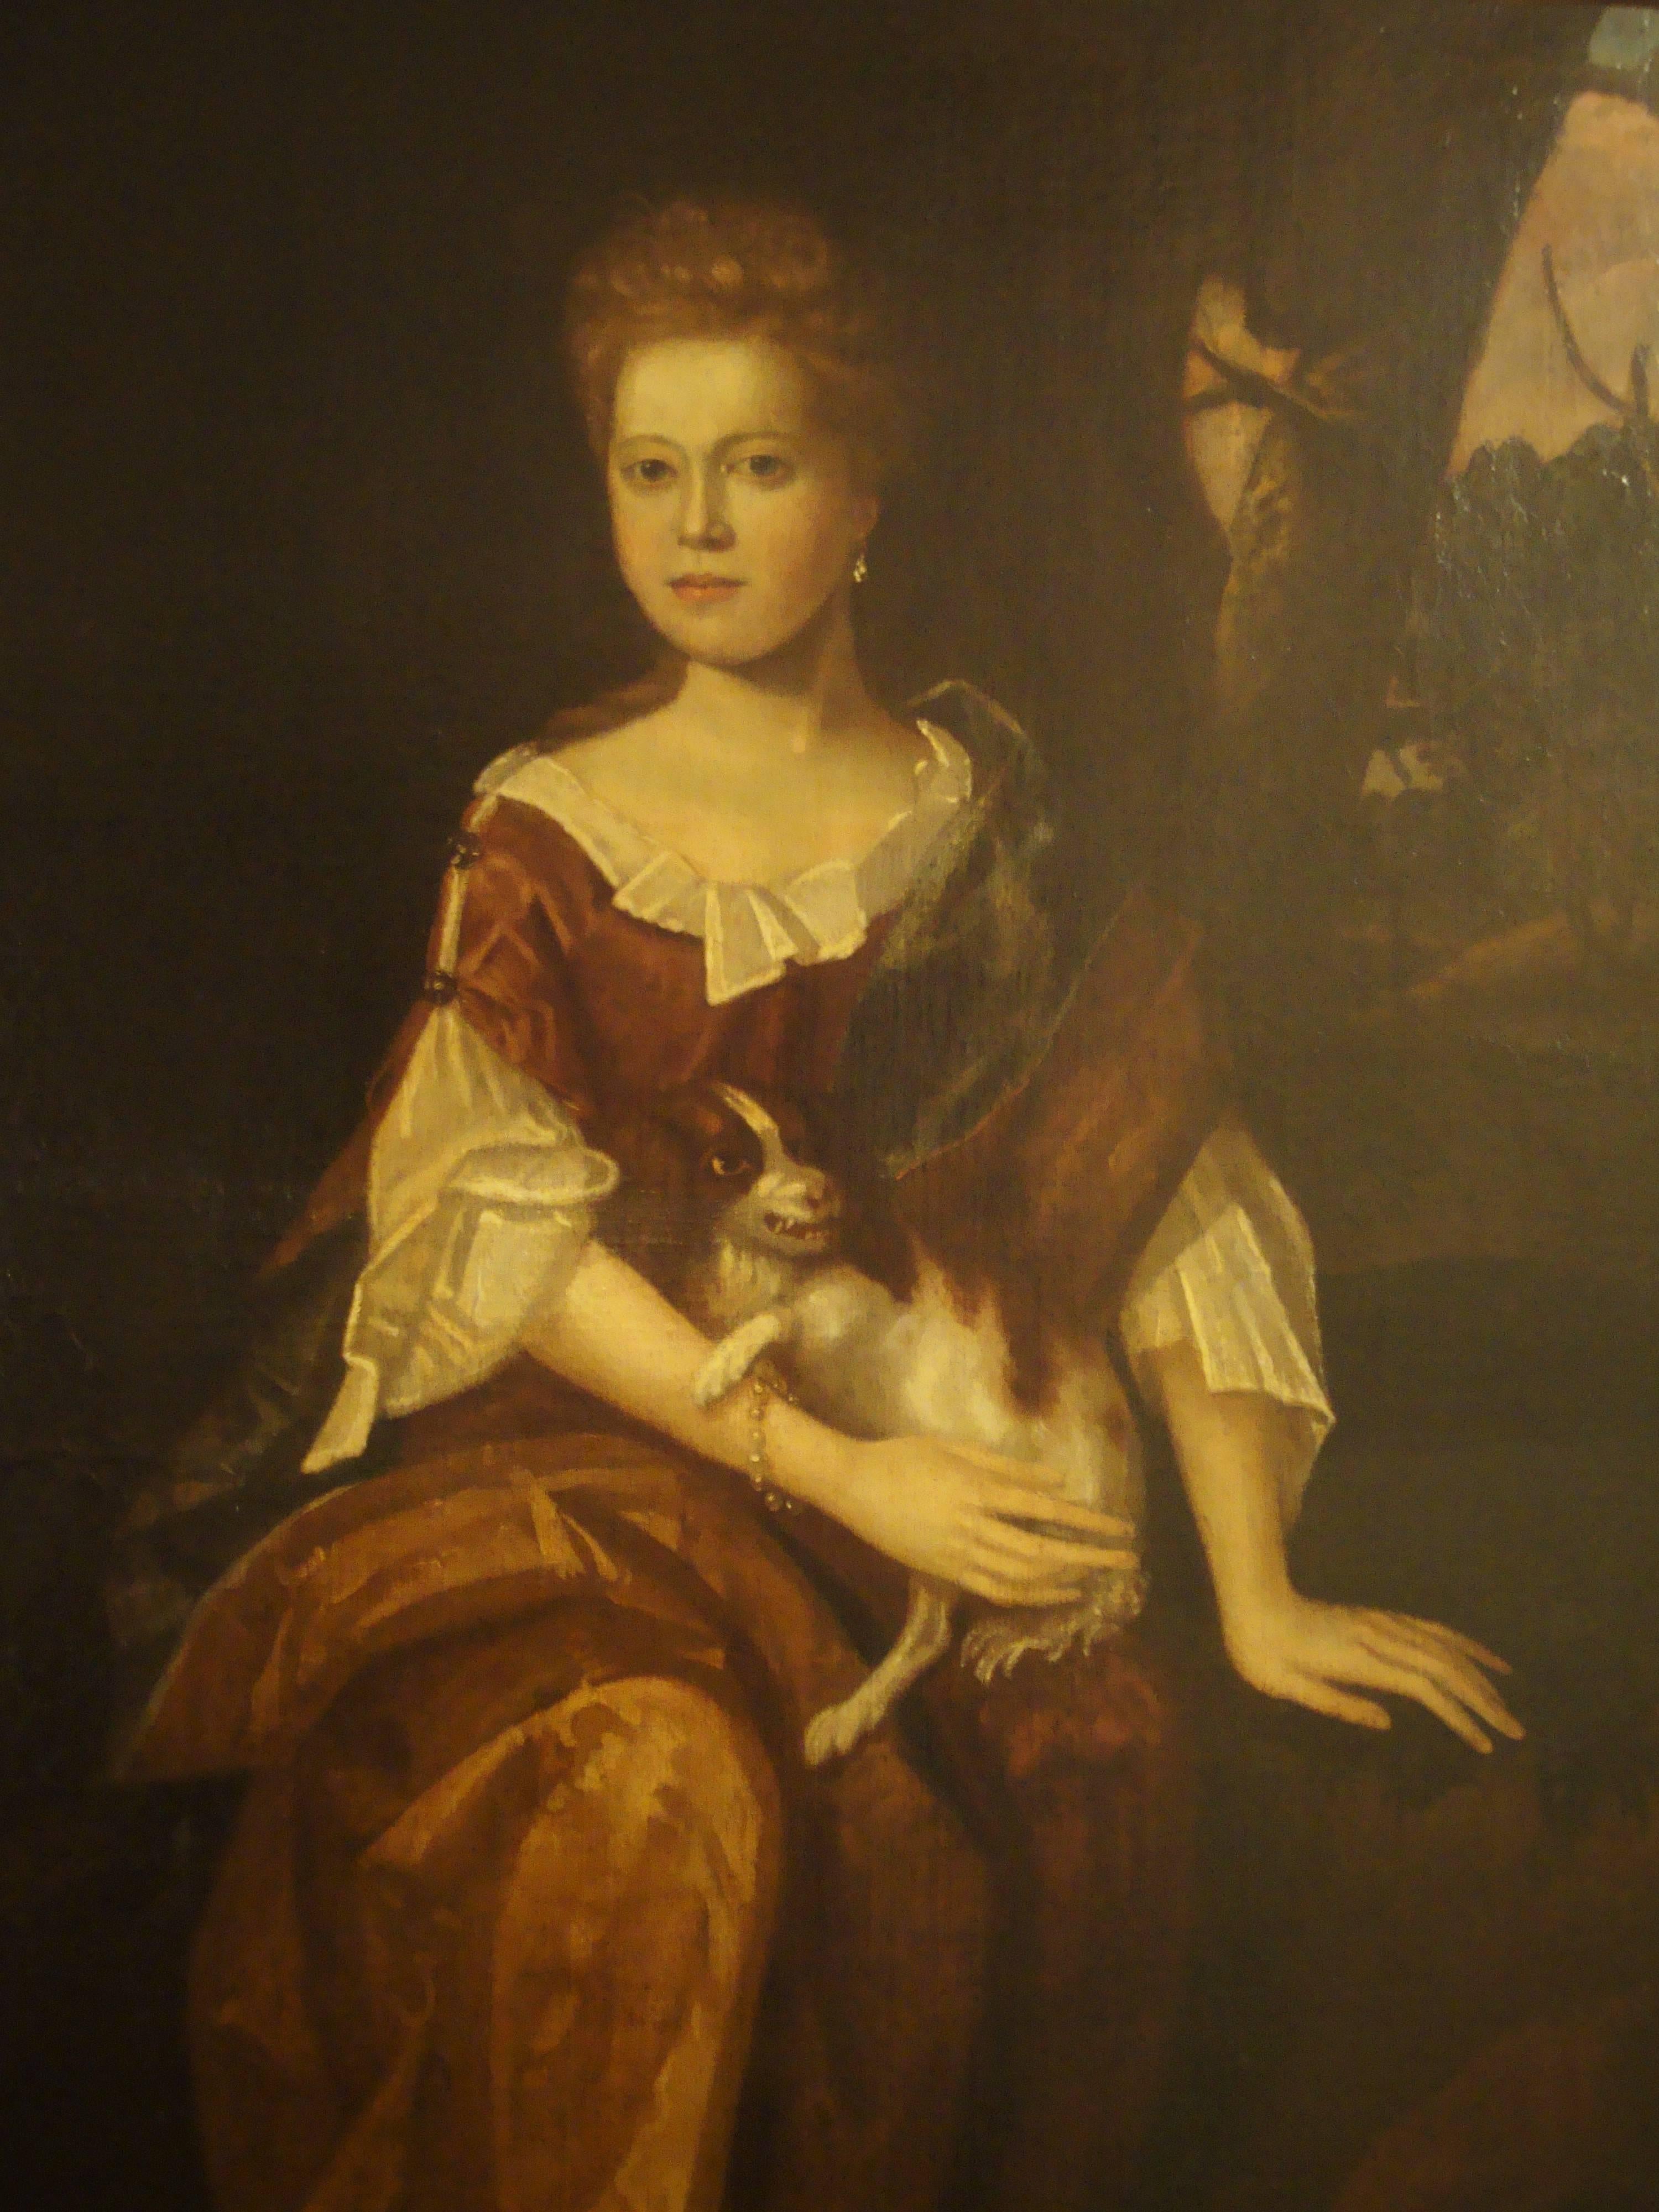 Baroque Oil on Canvas Portrait of Marjorie Muckleston with Her Dog